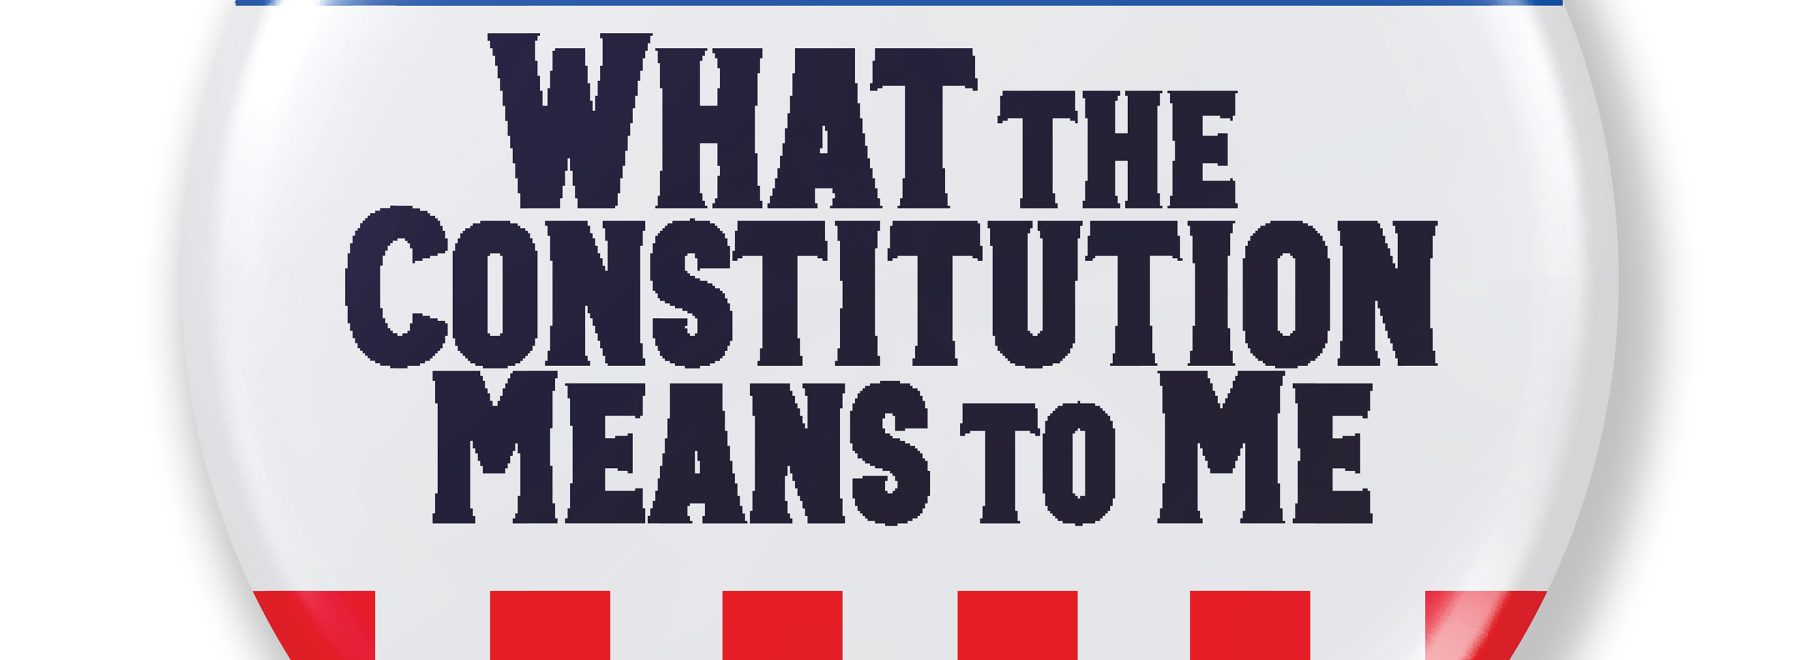 What the Constitution Means to Me logo